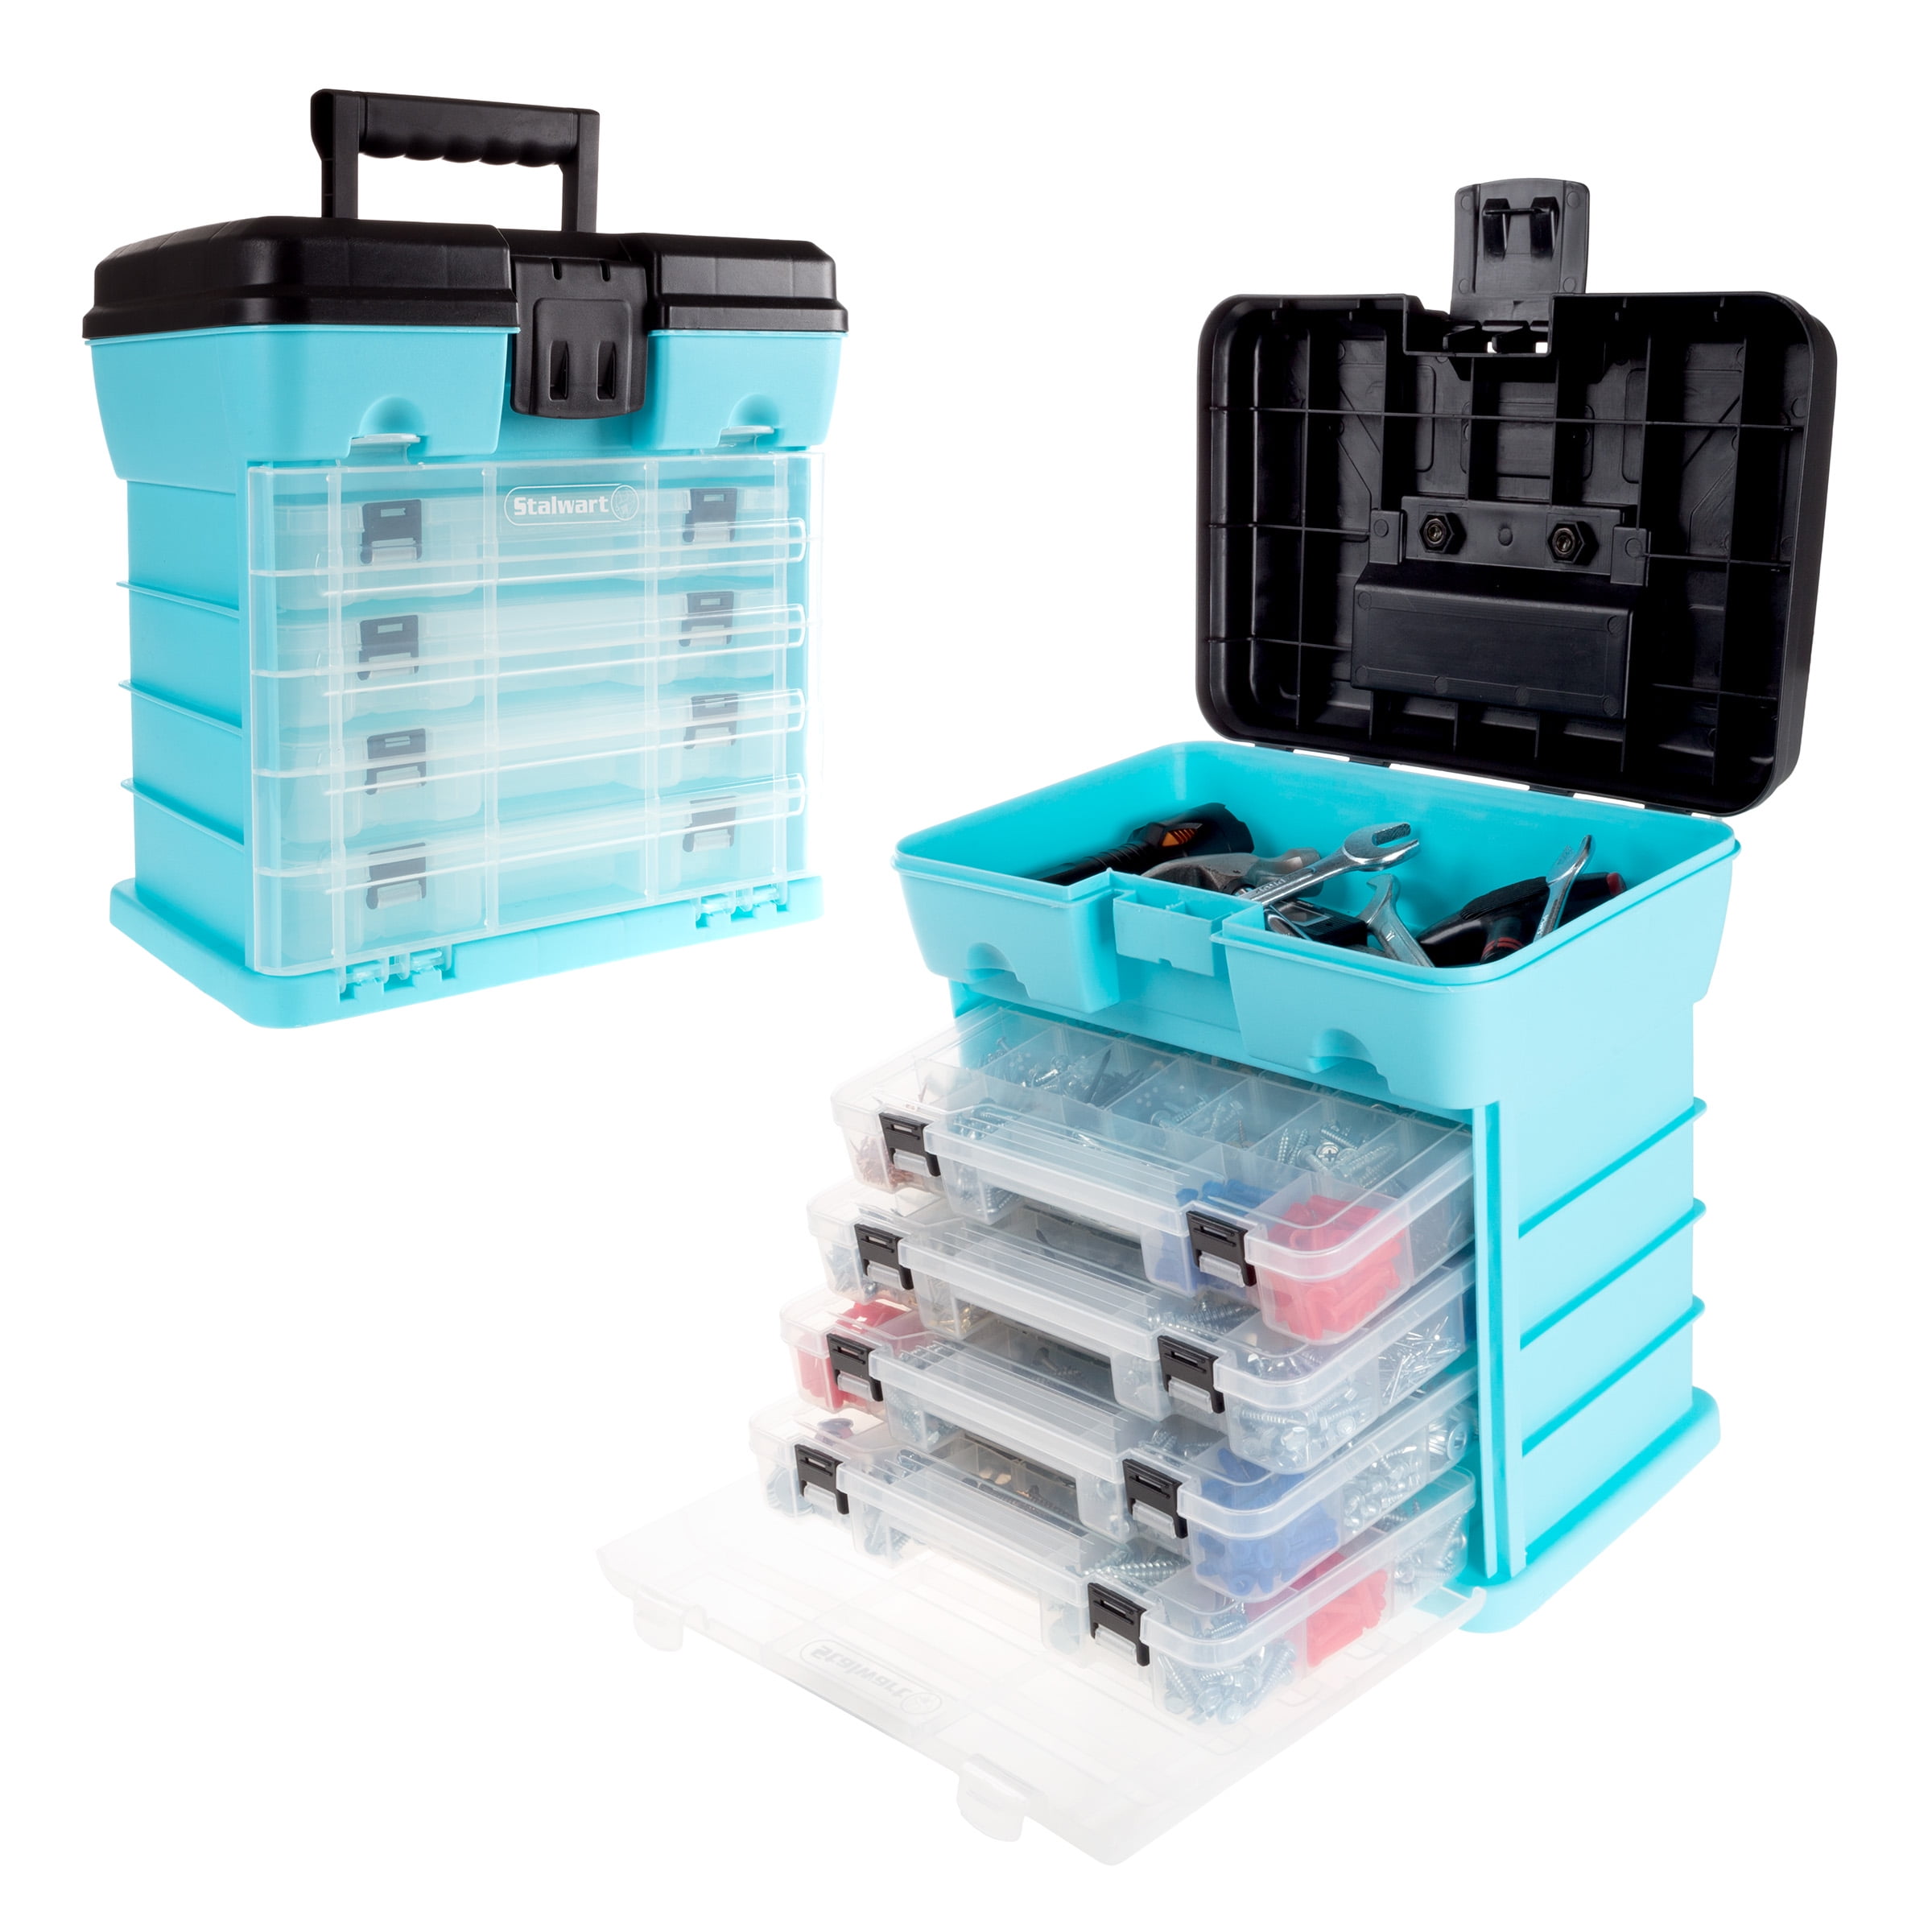 Juvale Tool Box - Organizer Box - Includes 4 13-Compartment Slideout Containers - Perfect for Storing Tackle, Craft Accessories, Nuts and Bolts, Pink